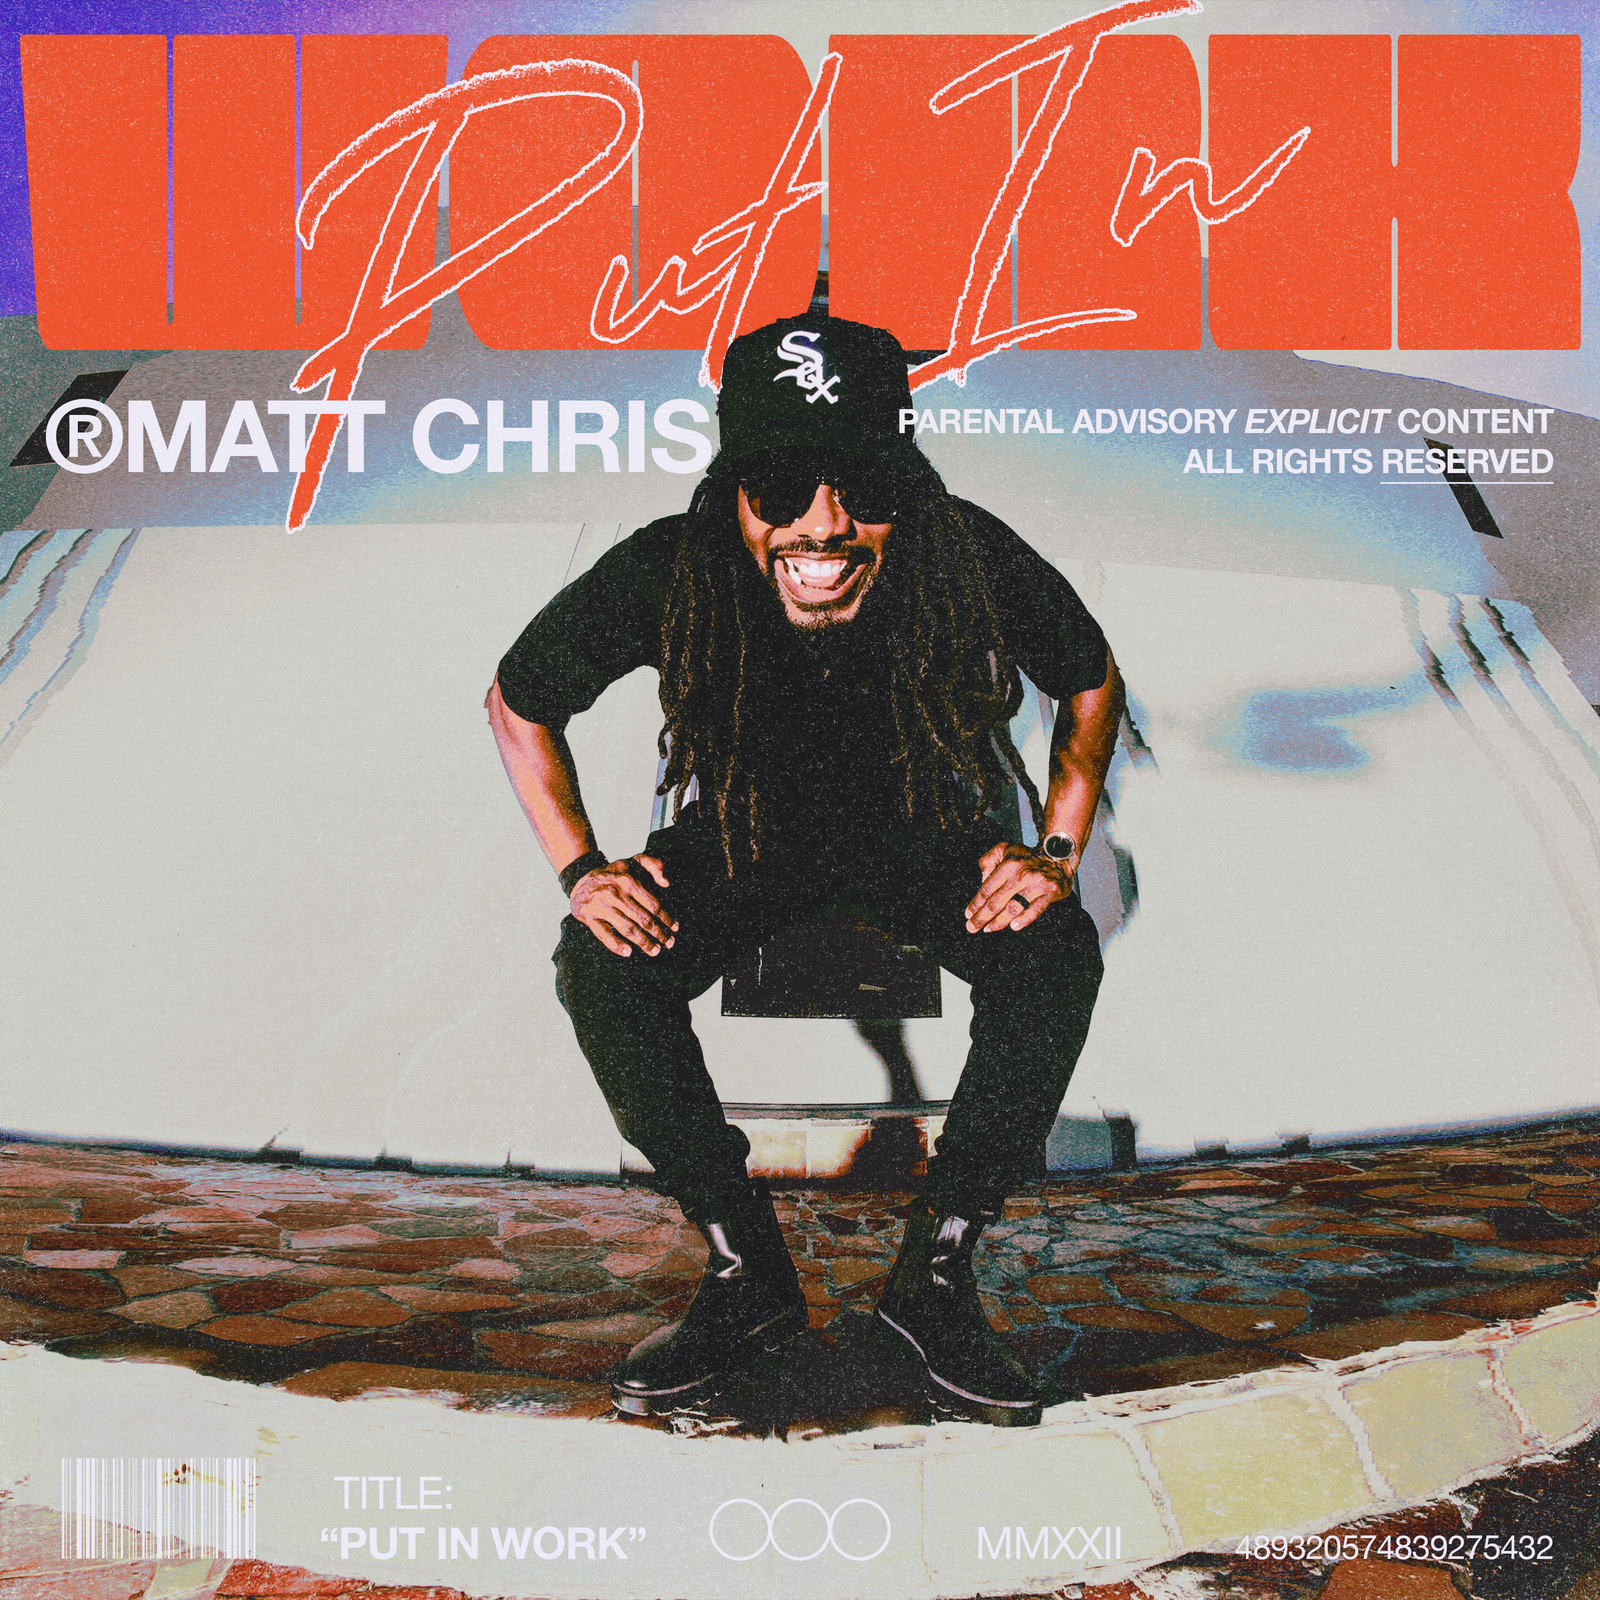 Rapper Matt Chris Is About To “Put In Work” With His New Single